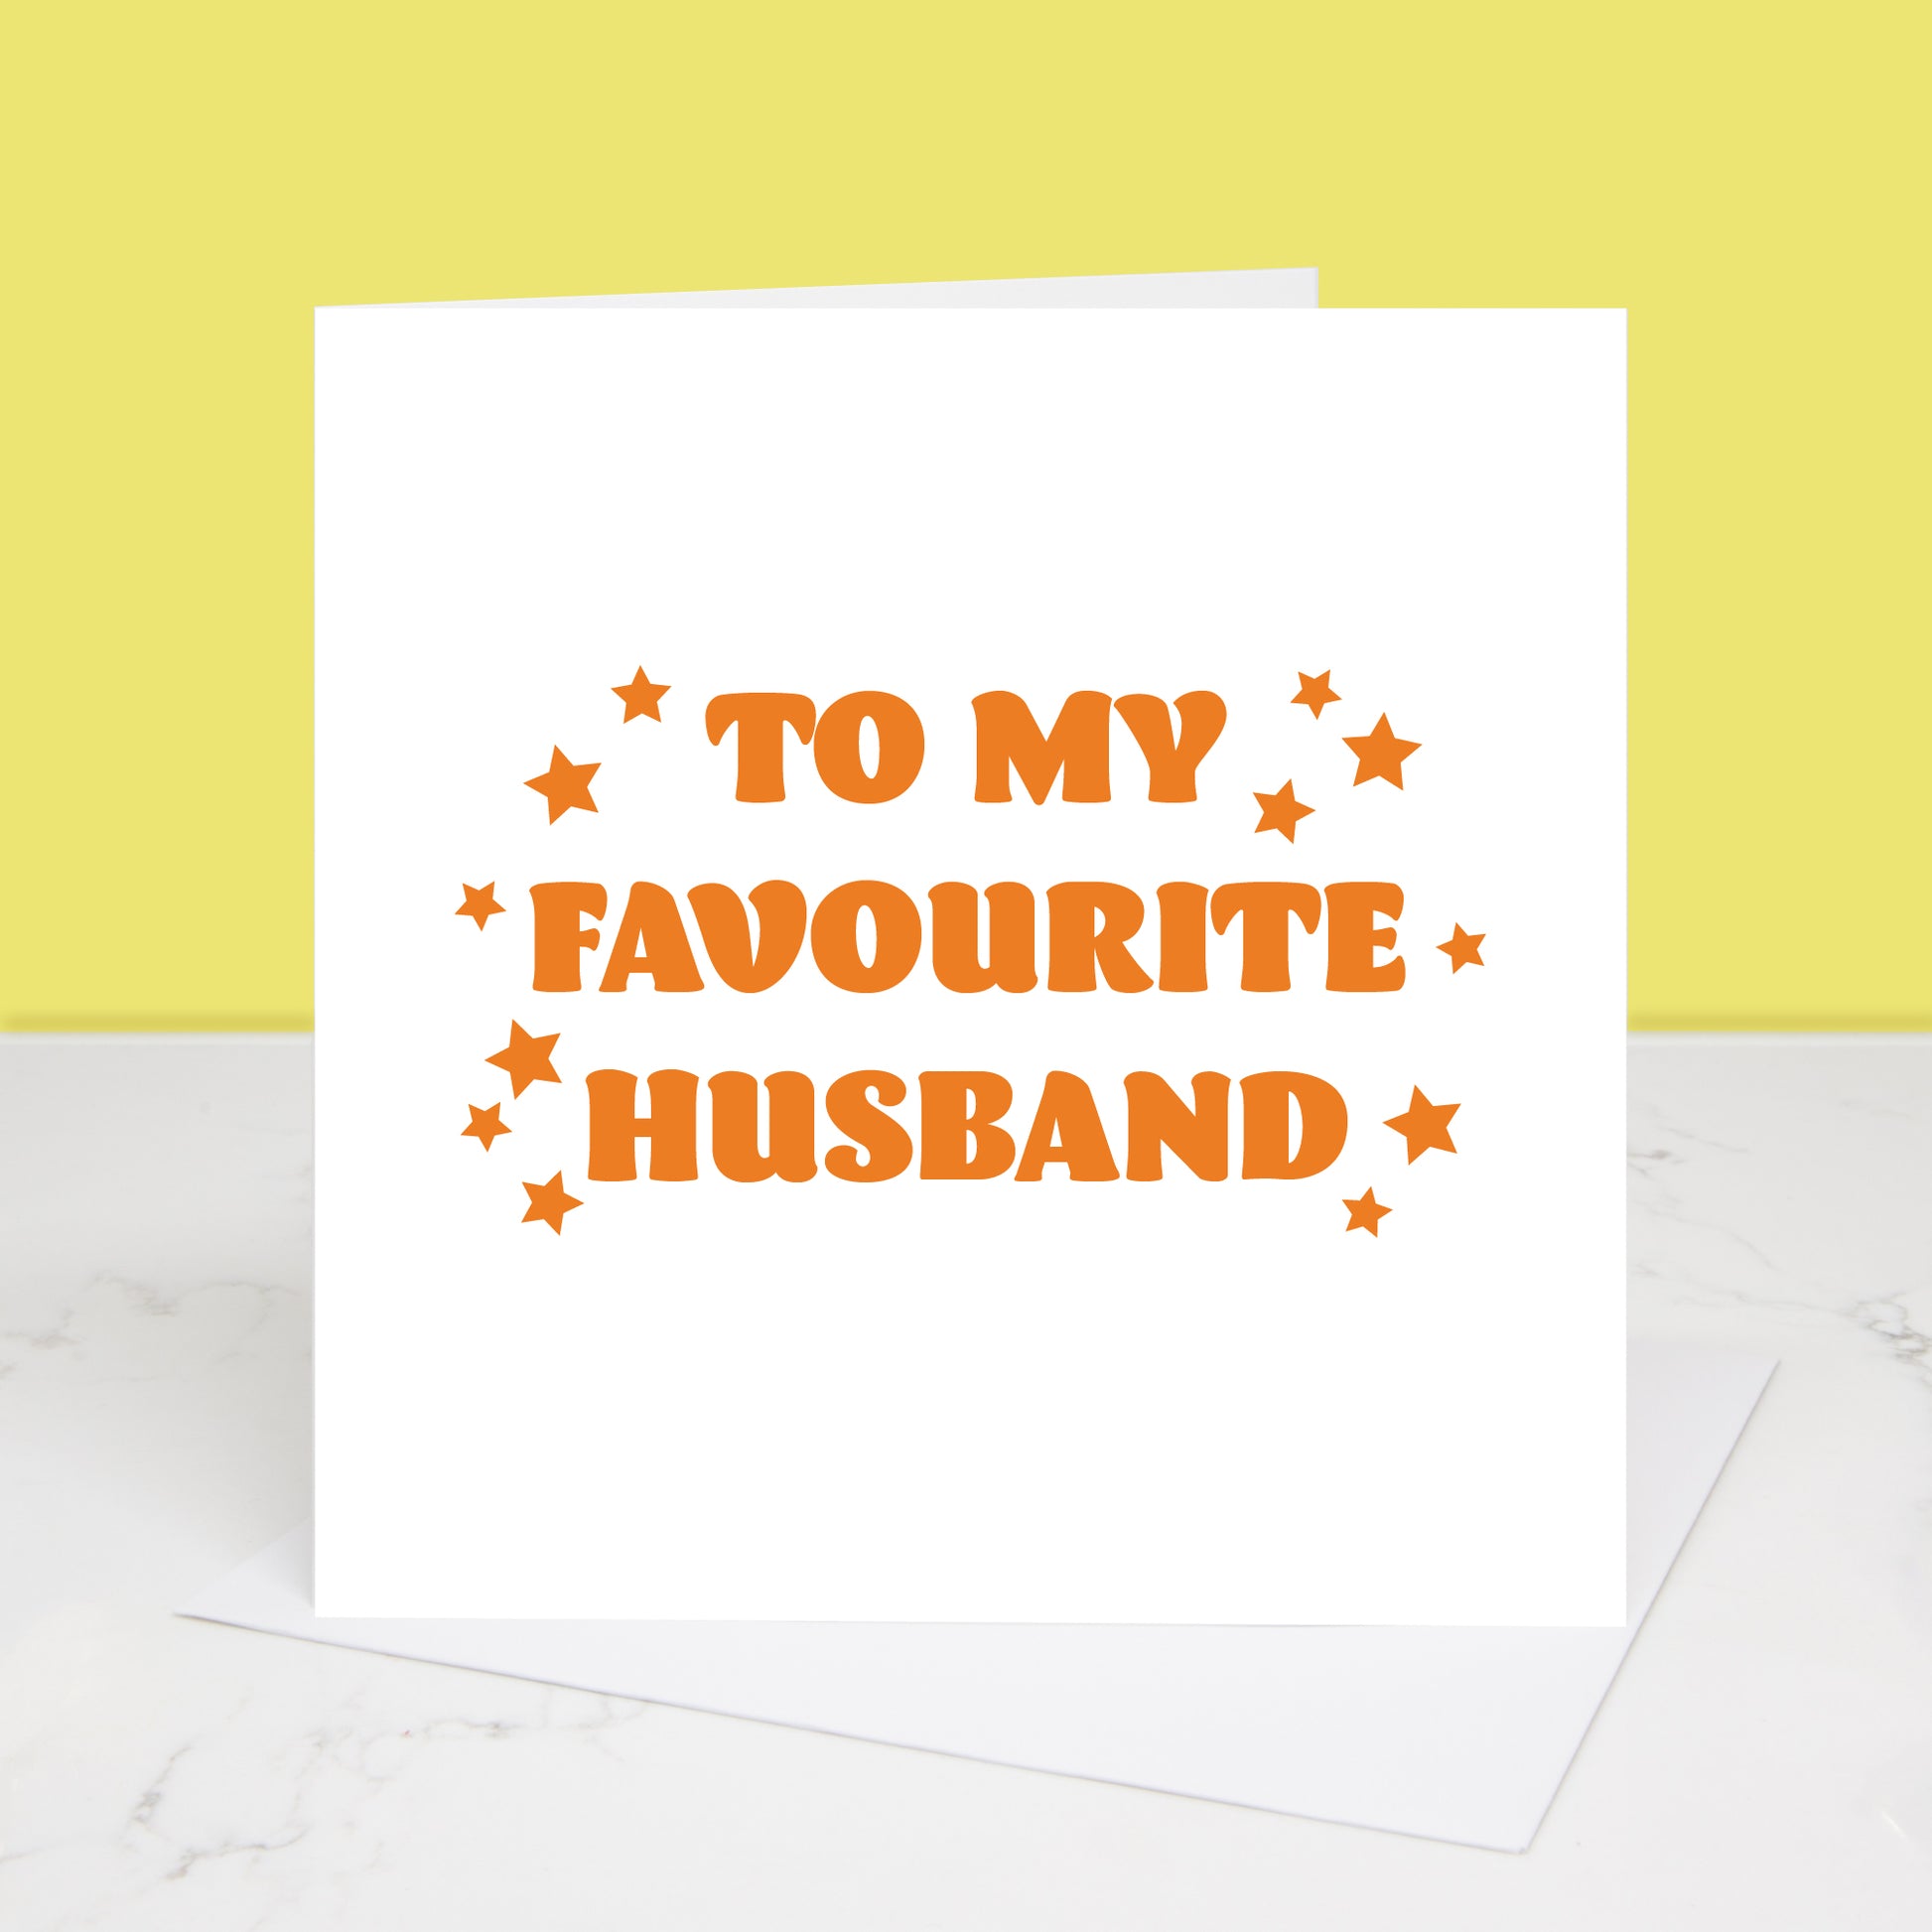 To My Favourite Husband Valentine's Day Card in orange.  All images and designs © Slice of Pie Designs